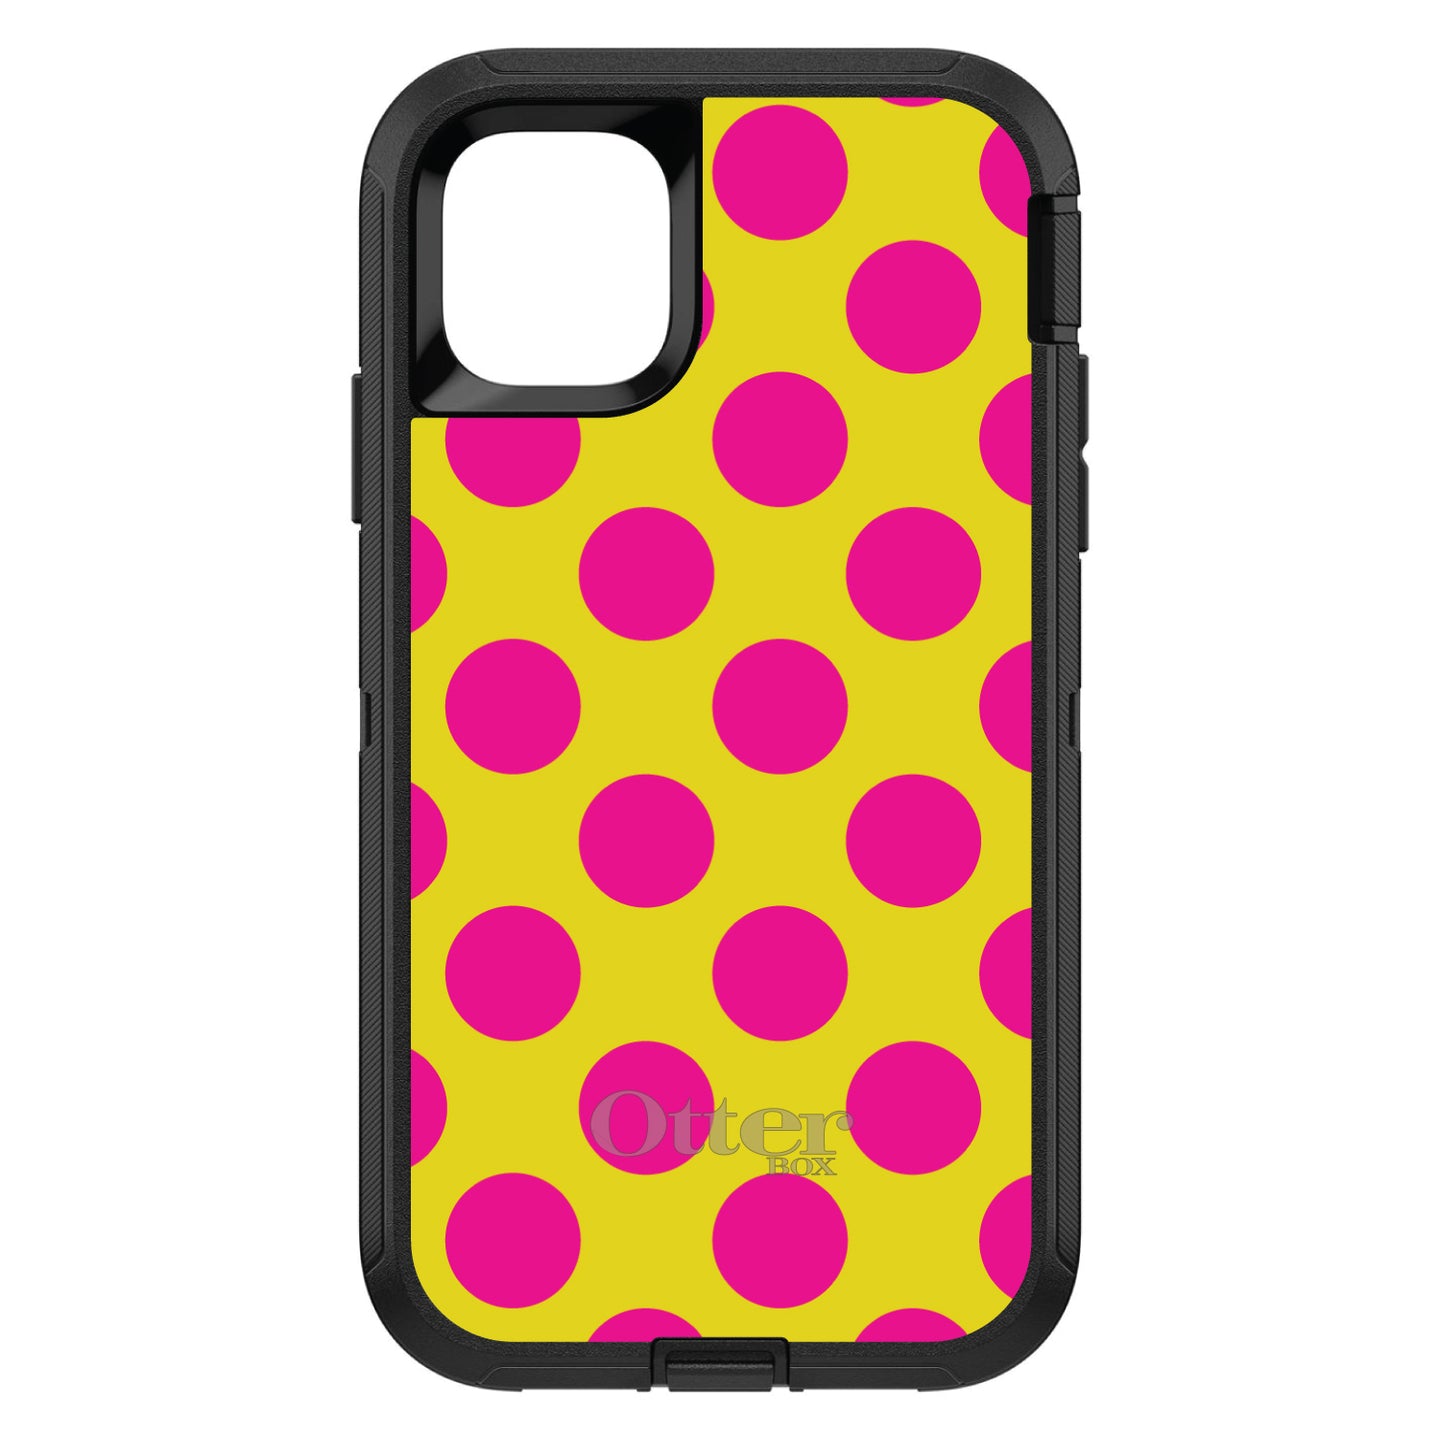 DistinctInk™ OtterBox Defender Series Case for Apple iPhone / Samsung Galaxy / Google Pixel - Yellow Hot Pink Polka Dots